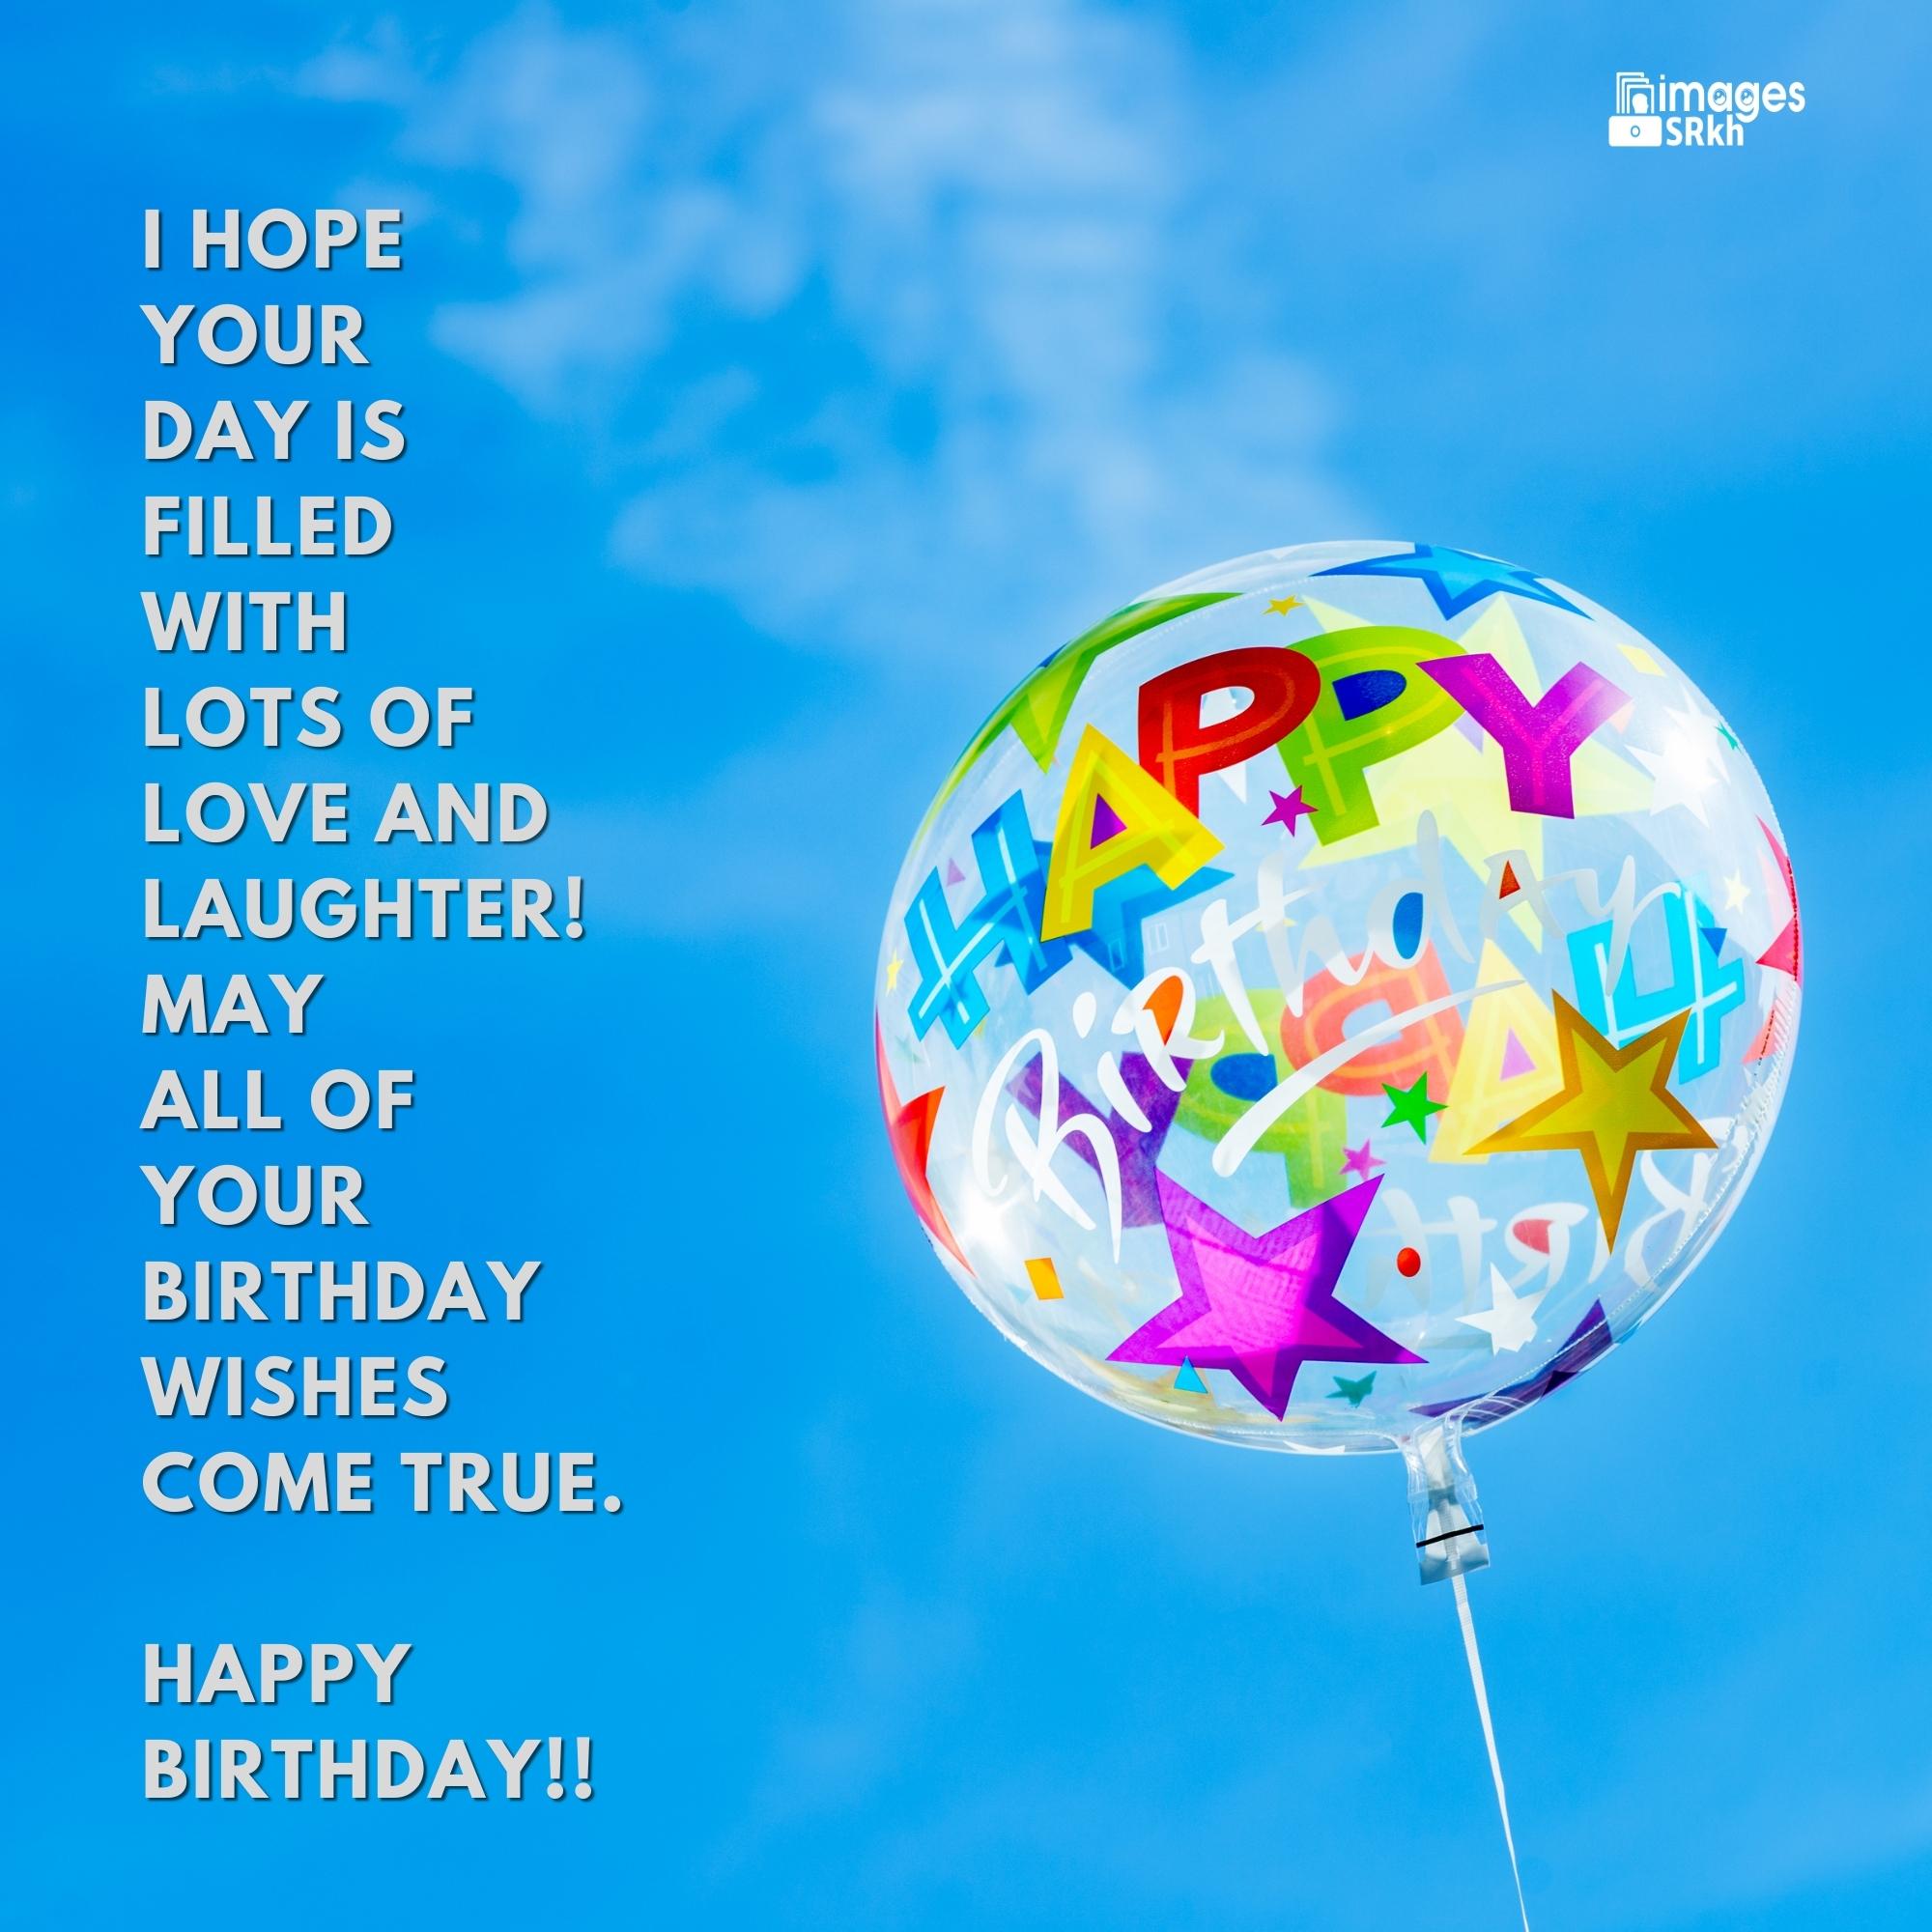 Happy Birthday Images With Quotation Full Hd